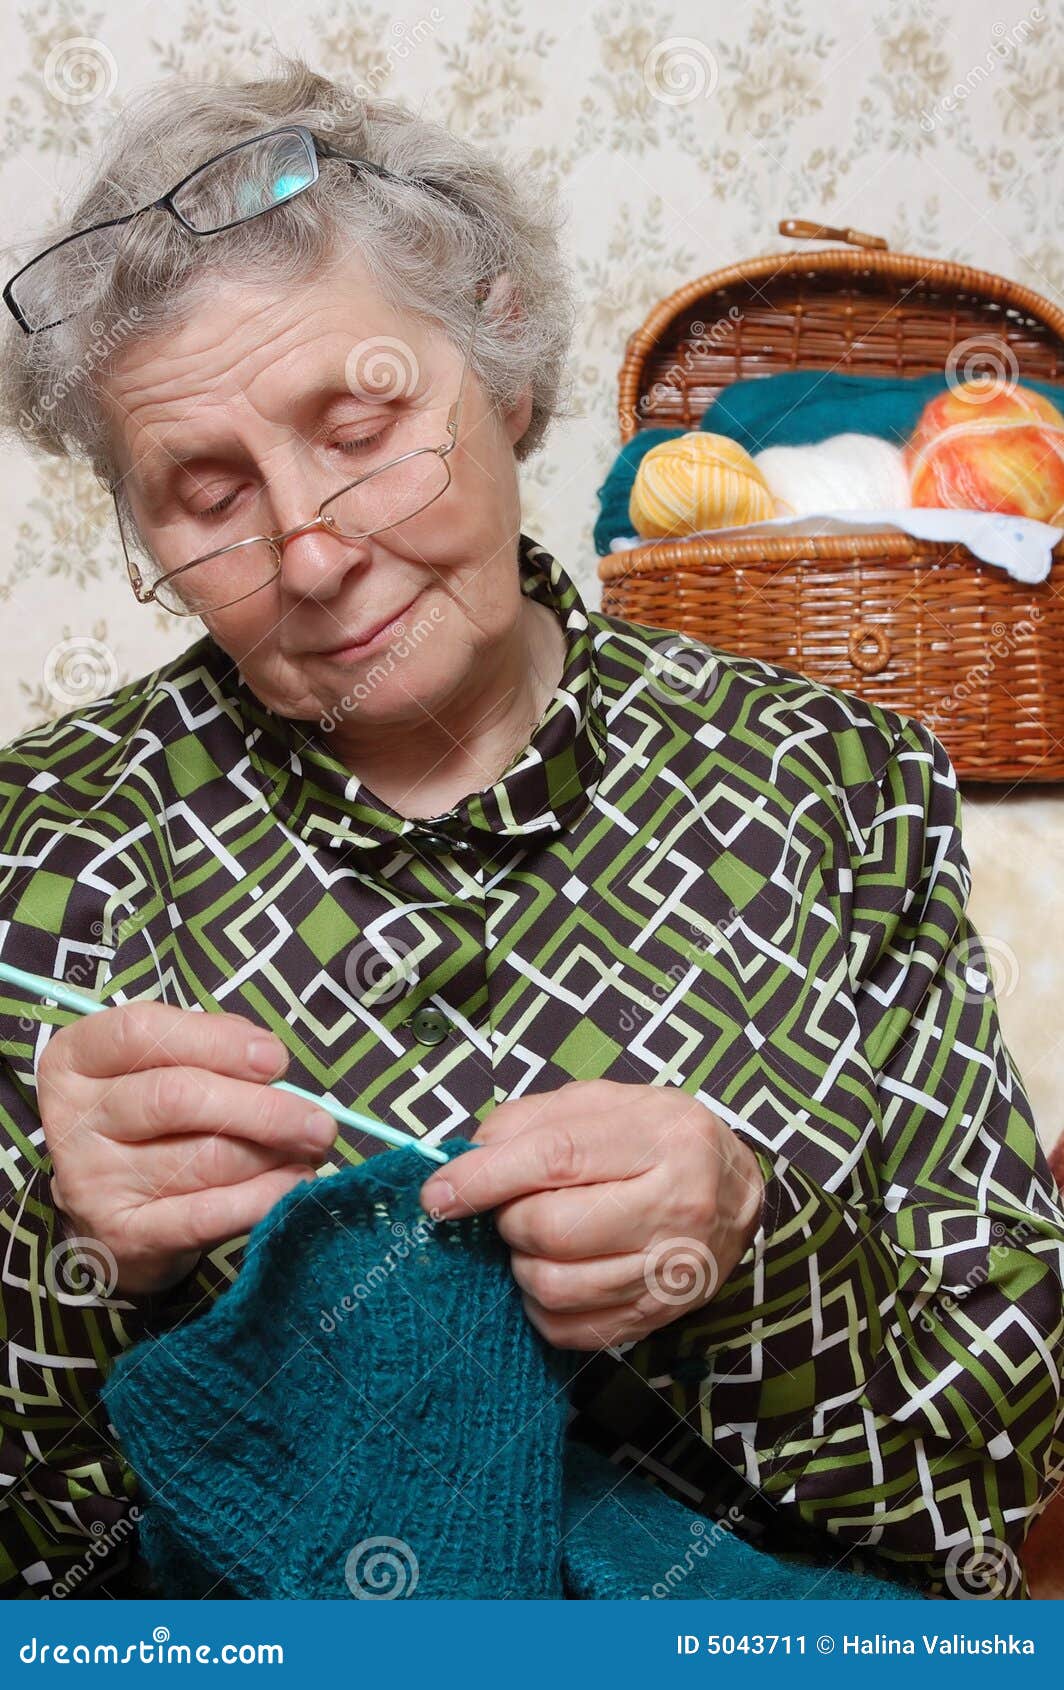 spectacled grandmother to crochet cardigan